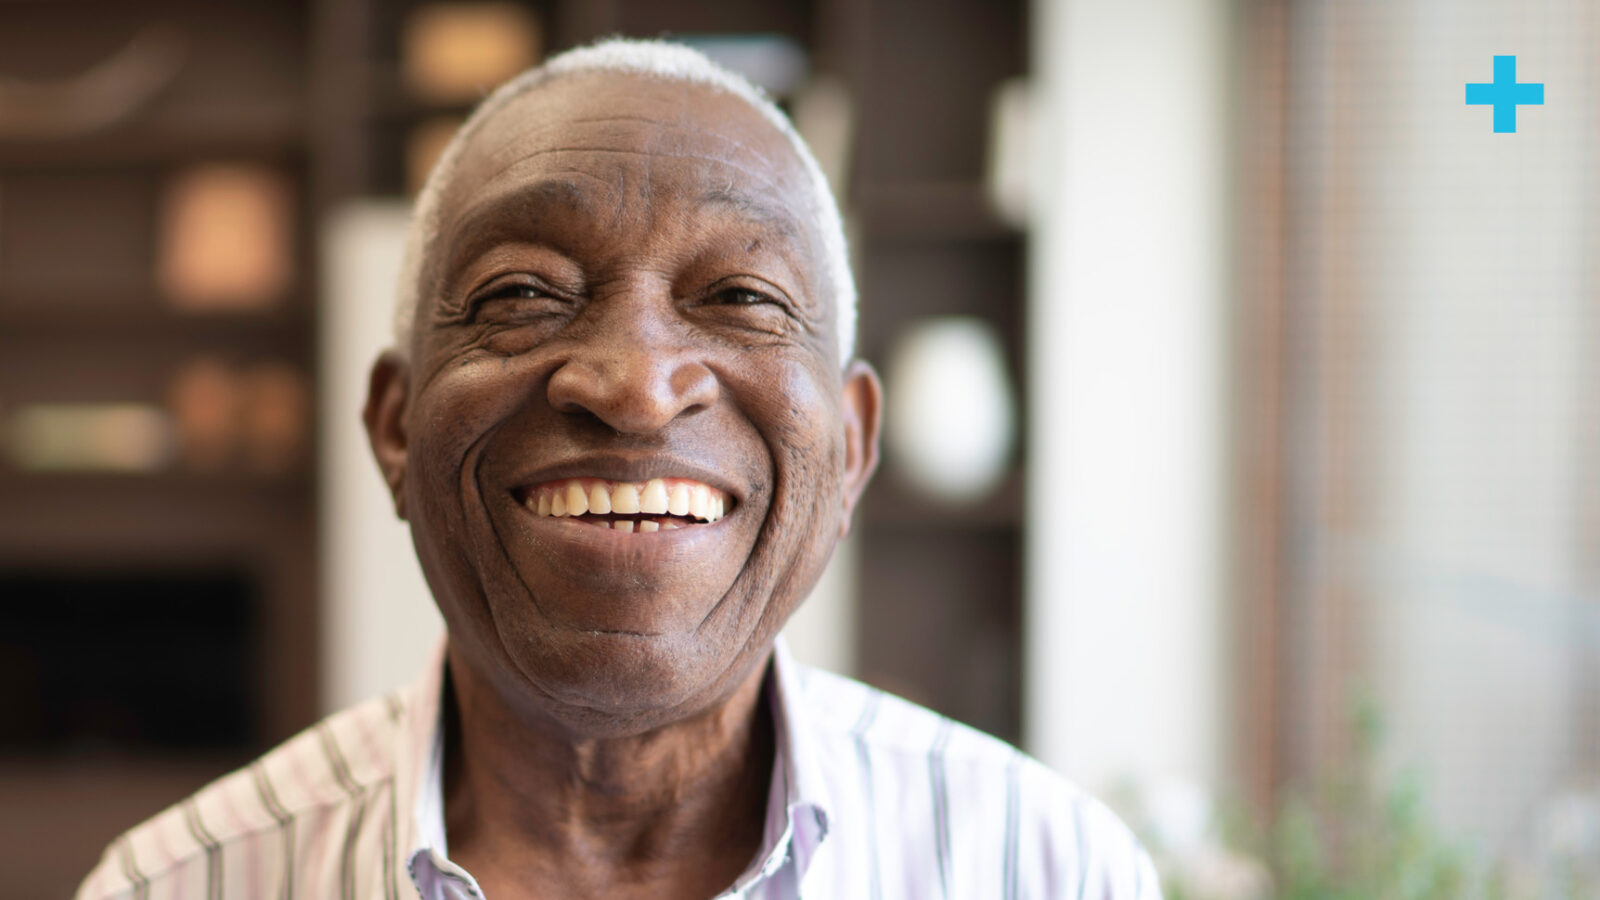 A older man looking at the camera with a big smile on his face.